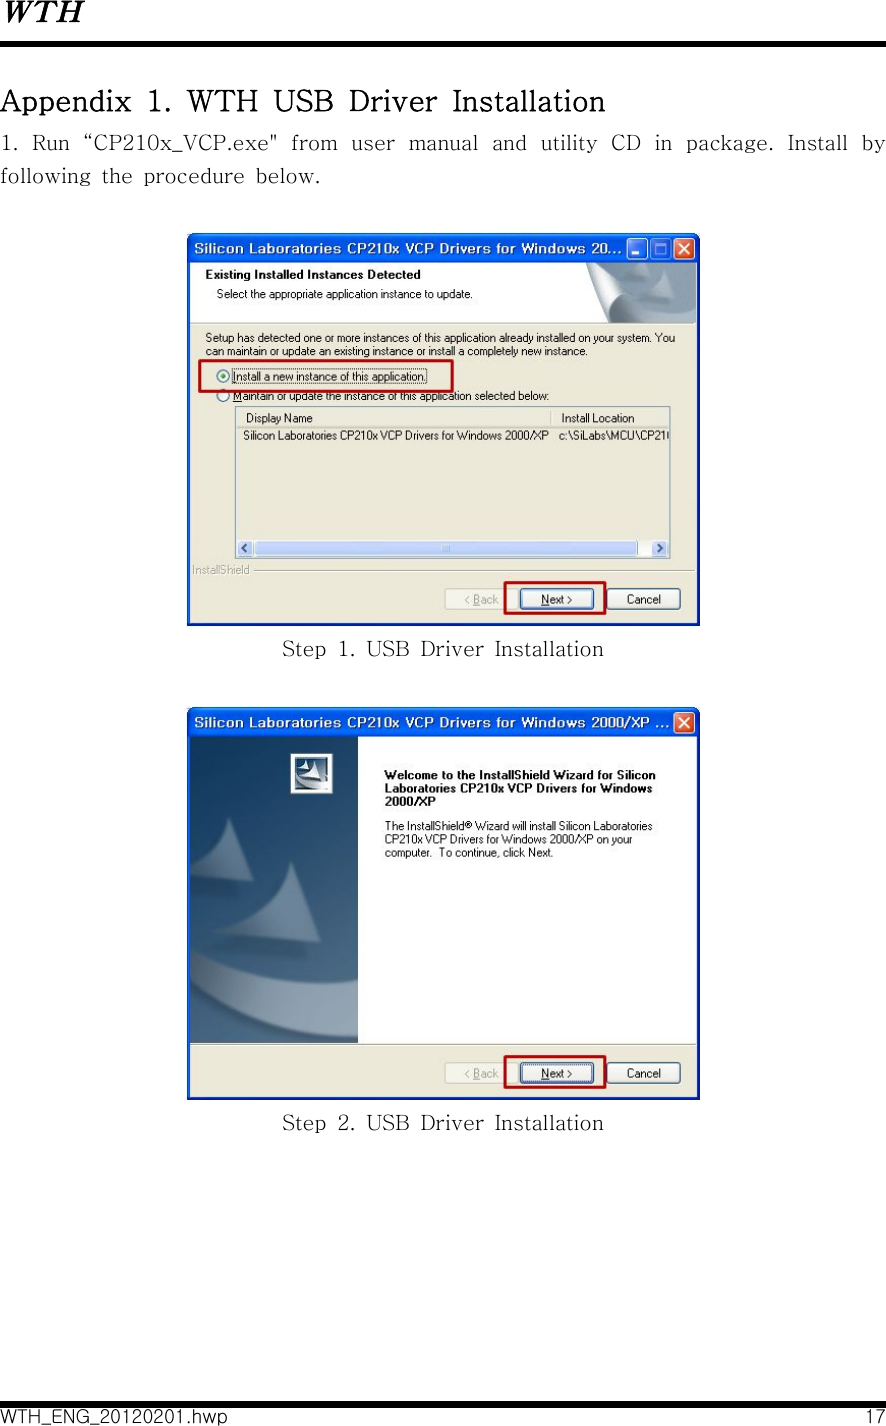 WTHWTH_ENG_20120201.hwp 17Appendix  1.  WTH  USB  Driver  Installation1.  Run  “CP210x_VCP.exe&quot;  from  user  manual  and  utility  CD  in  package.  Install  by following  the  procedure  below. Step  1.  USB  Driver  InstallationStep  2.  USB  Driver  Installation